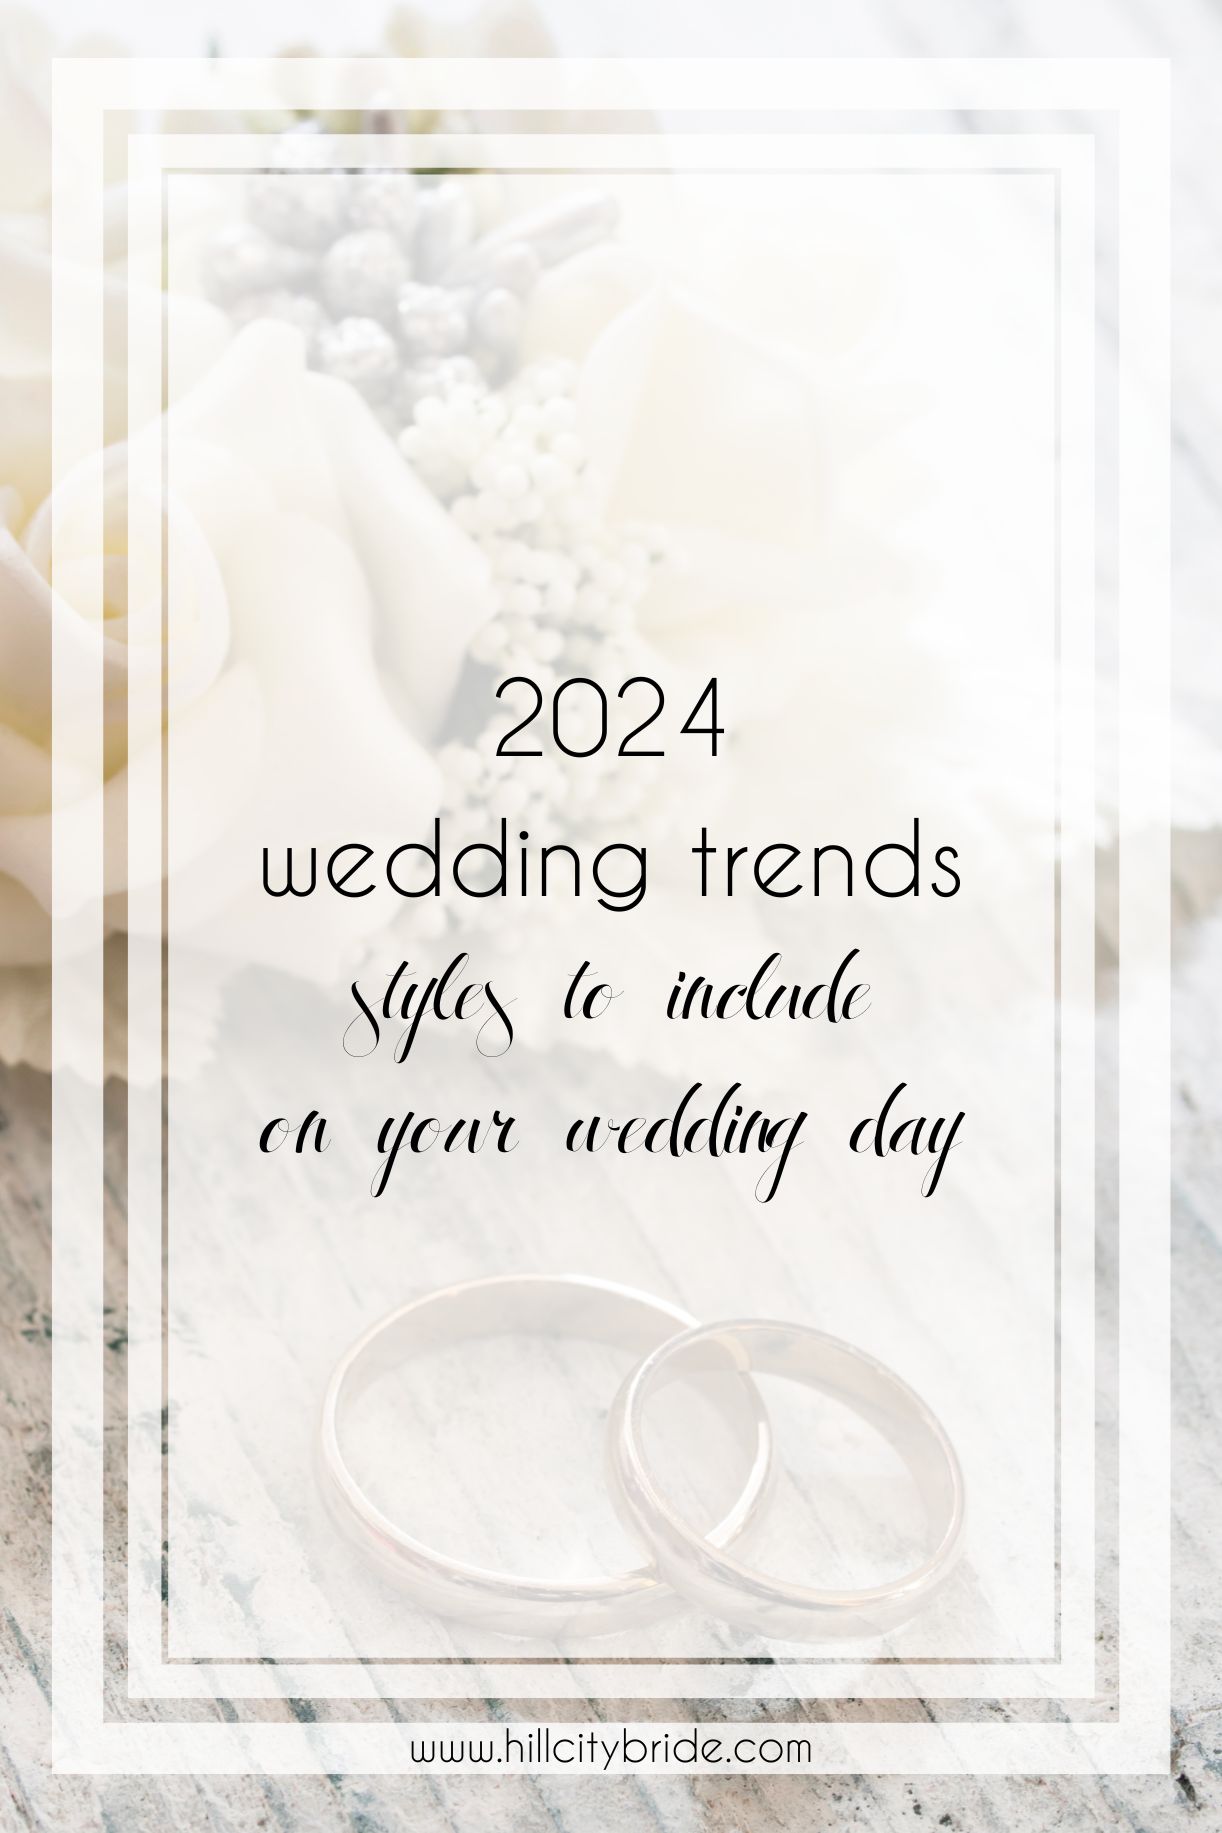 10 Fabulous 2024 Wedding Trends to Try on Your Big Day